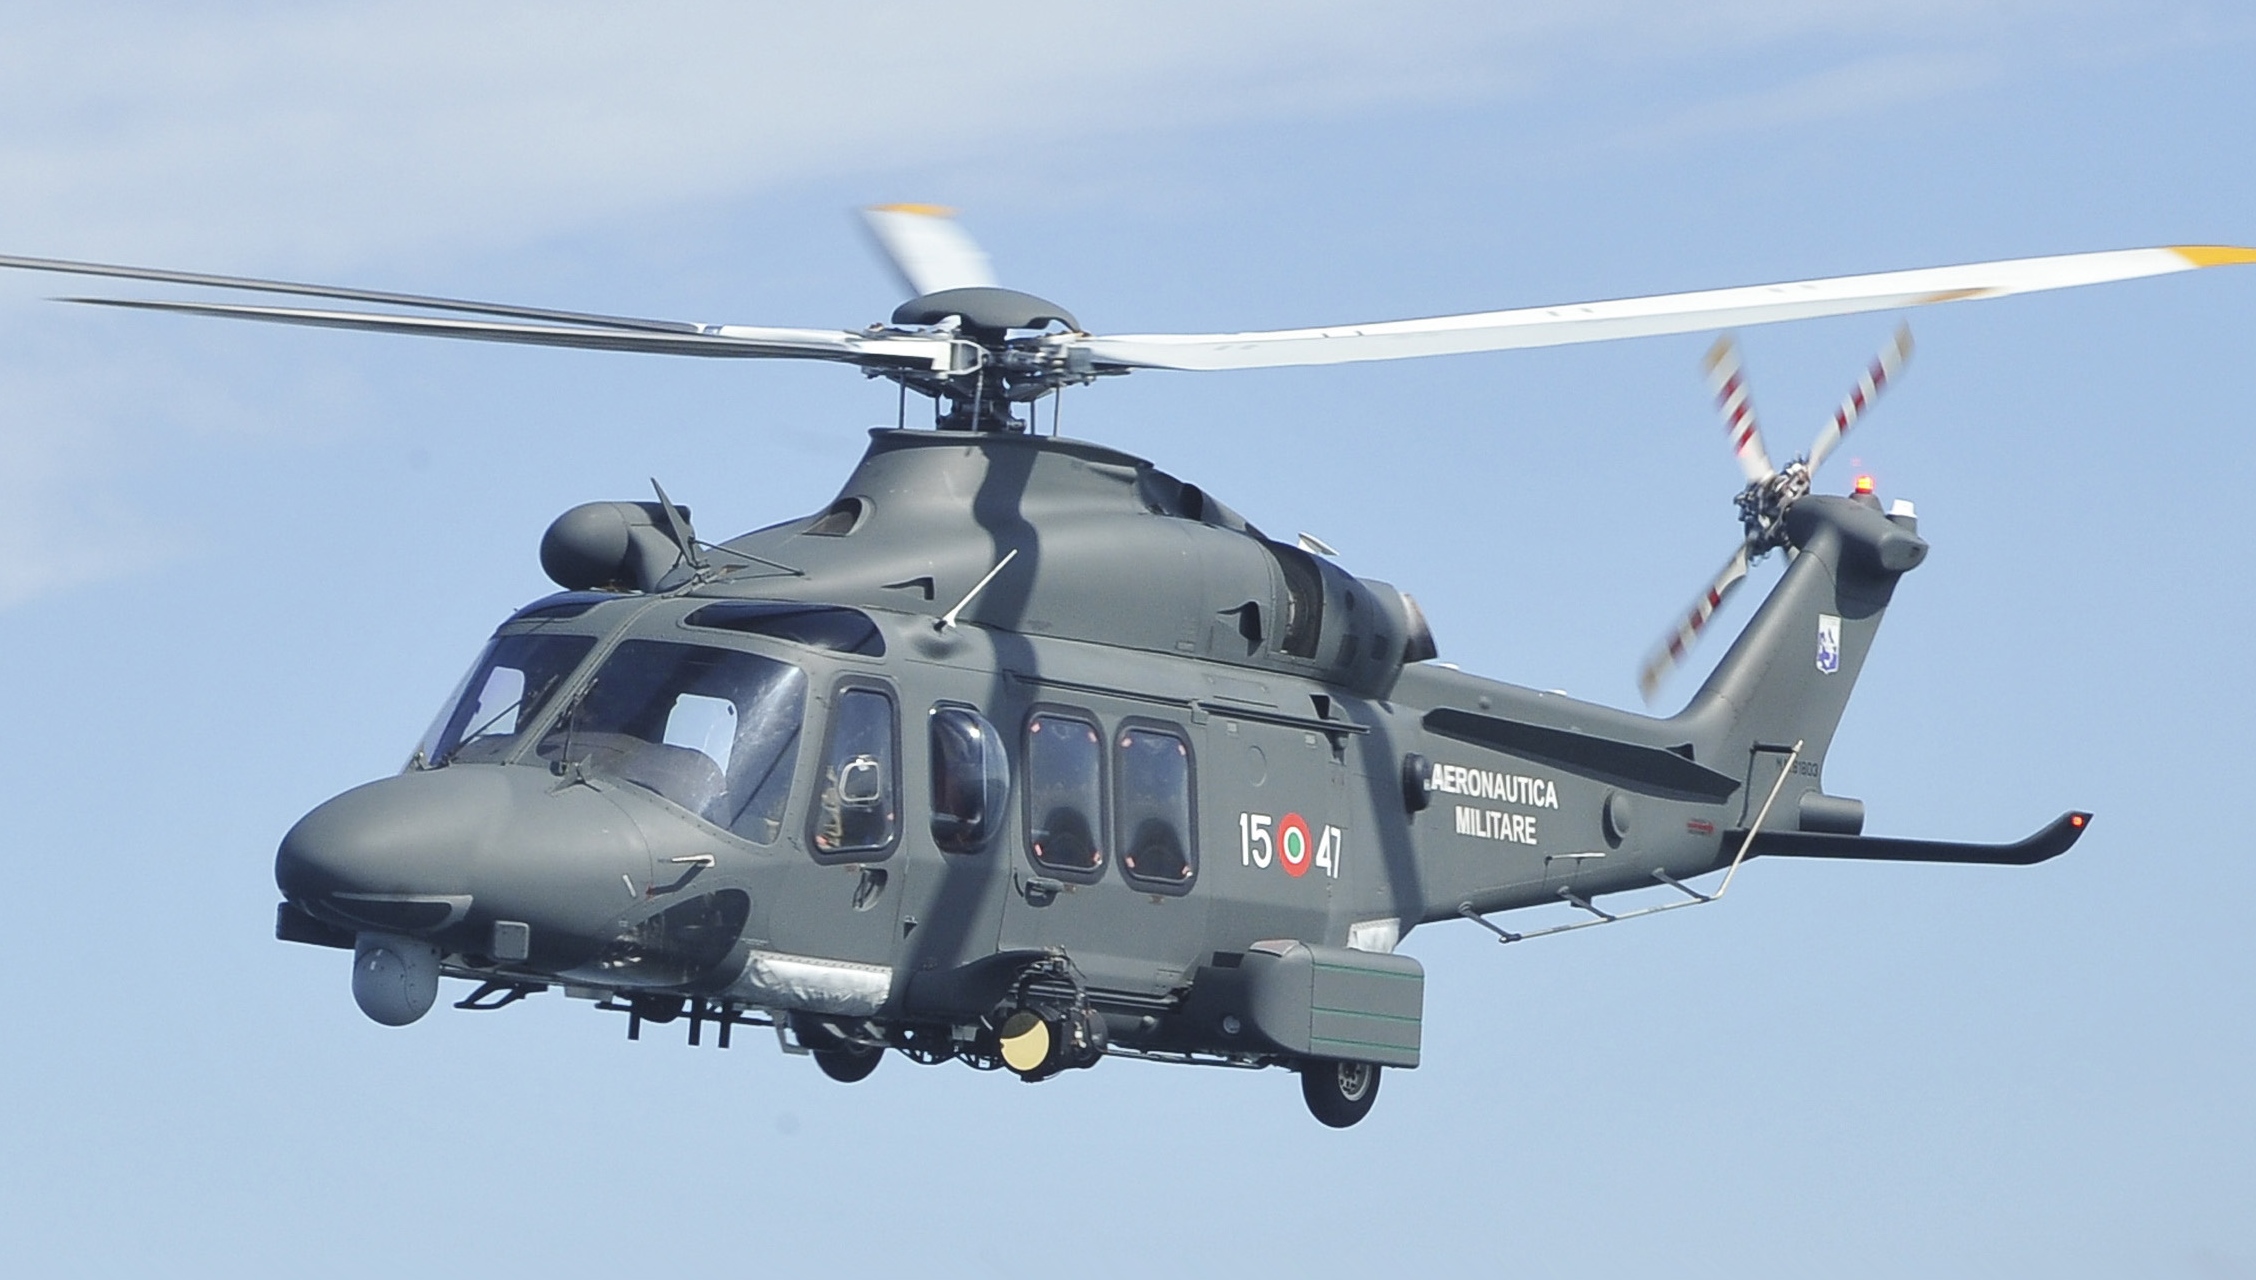 Italian_Helicopter_HH139%2C_Trident_Juncture_15_%28cropped%29.jpg